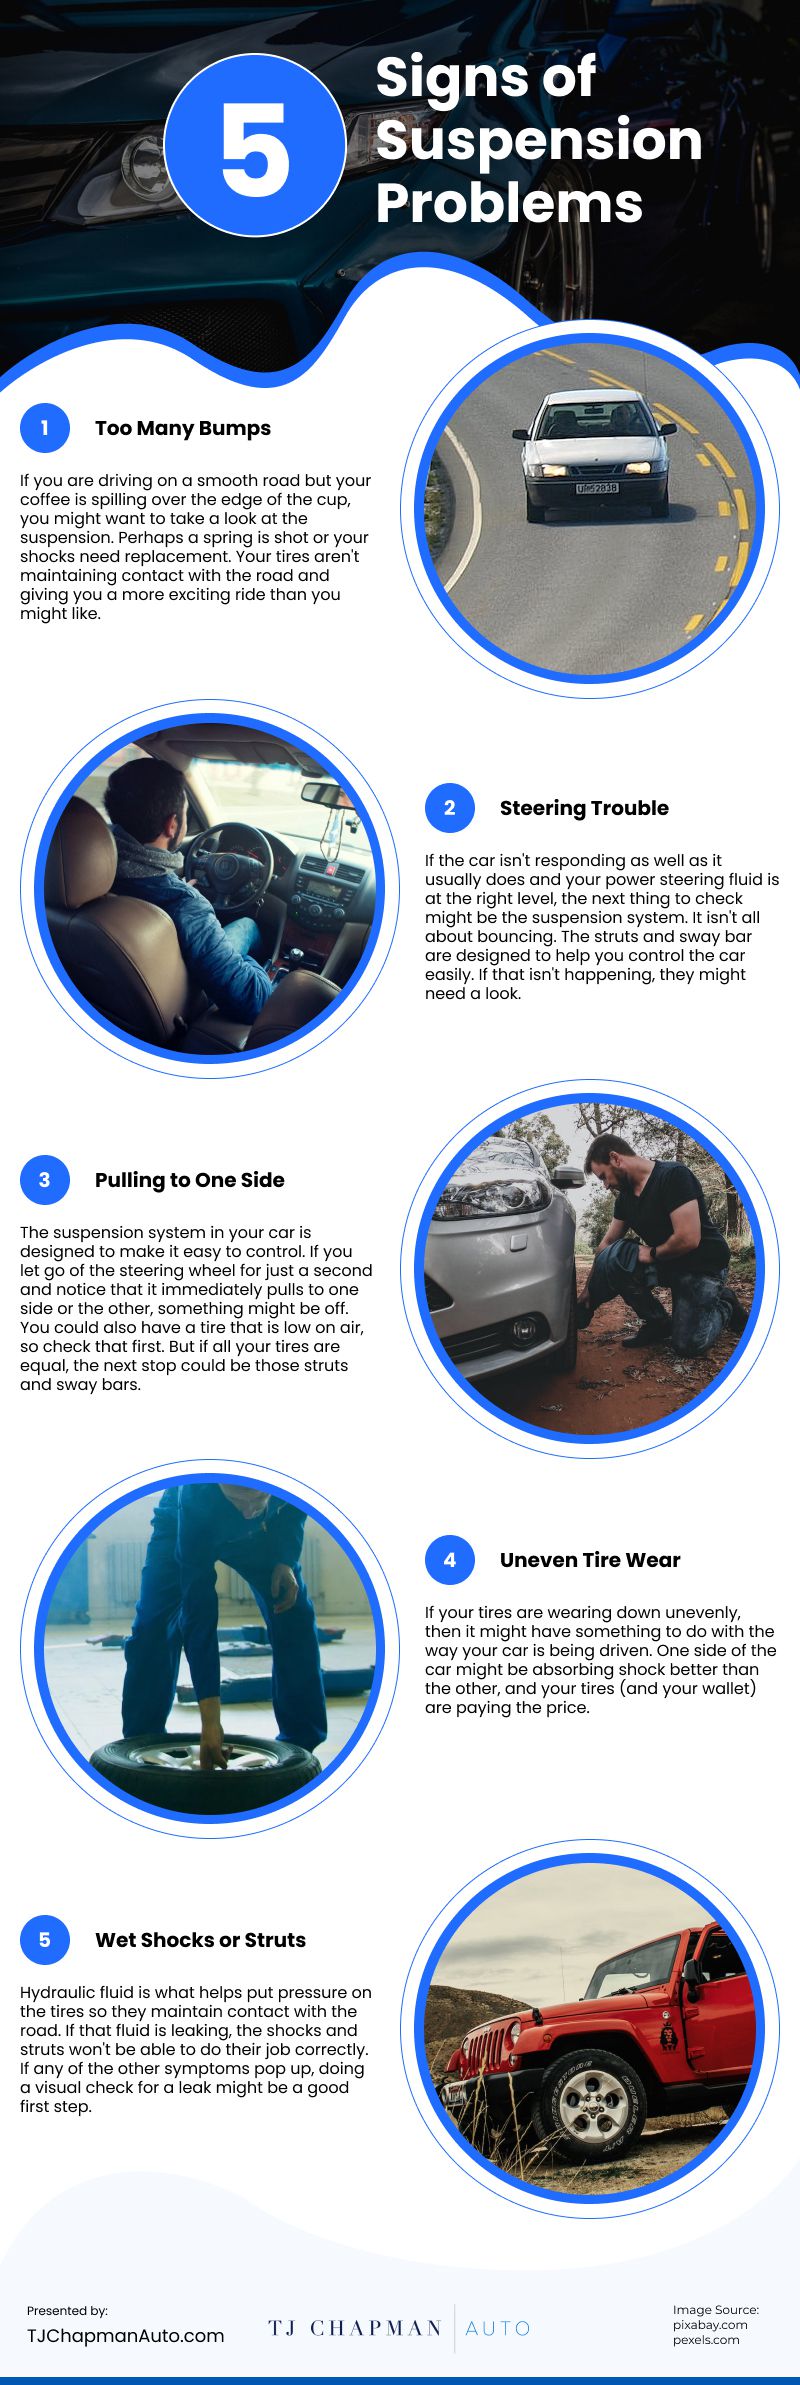 5 Signs of Suspension Problems Infographic